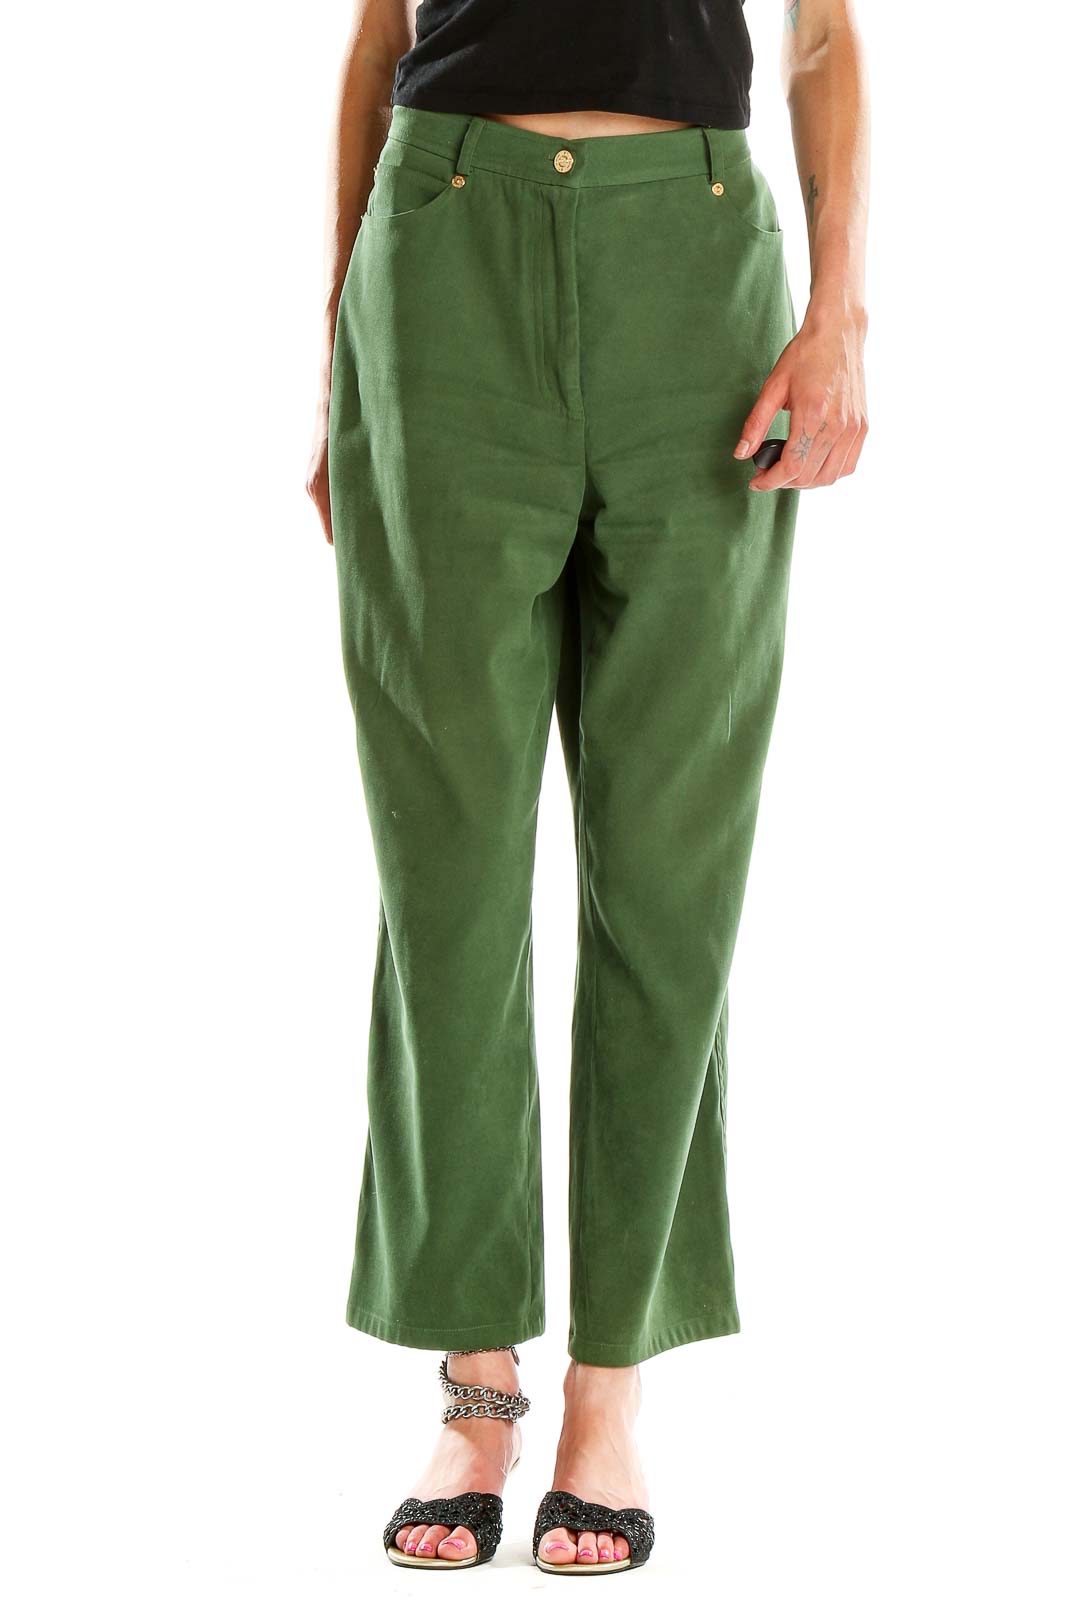 Green Retro Trousers Front